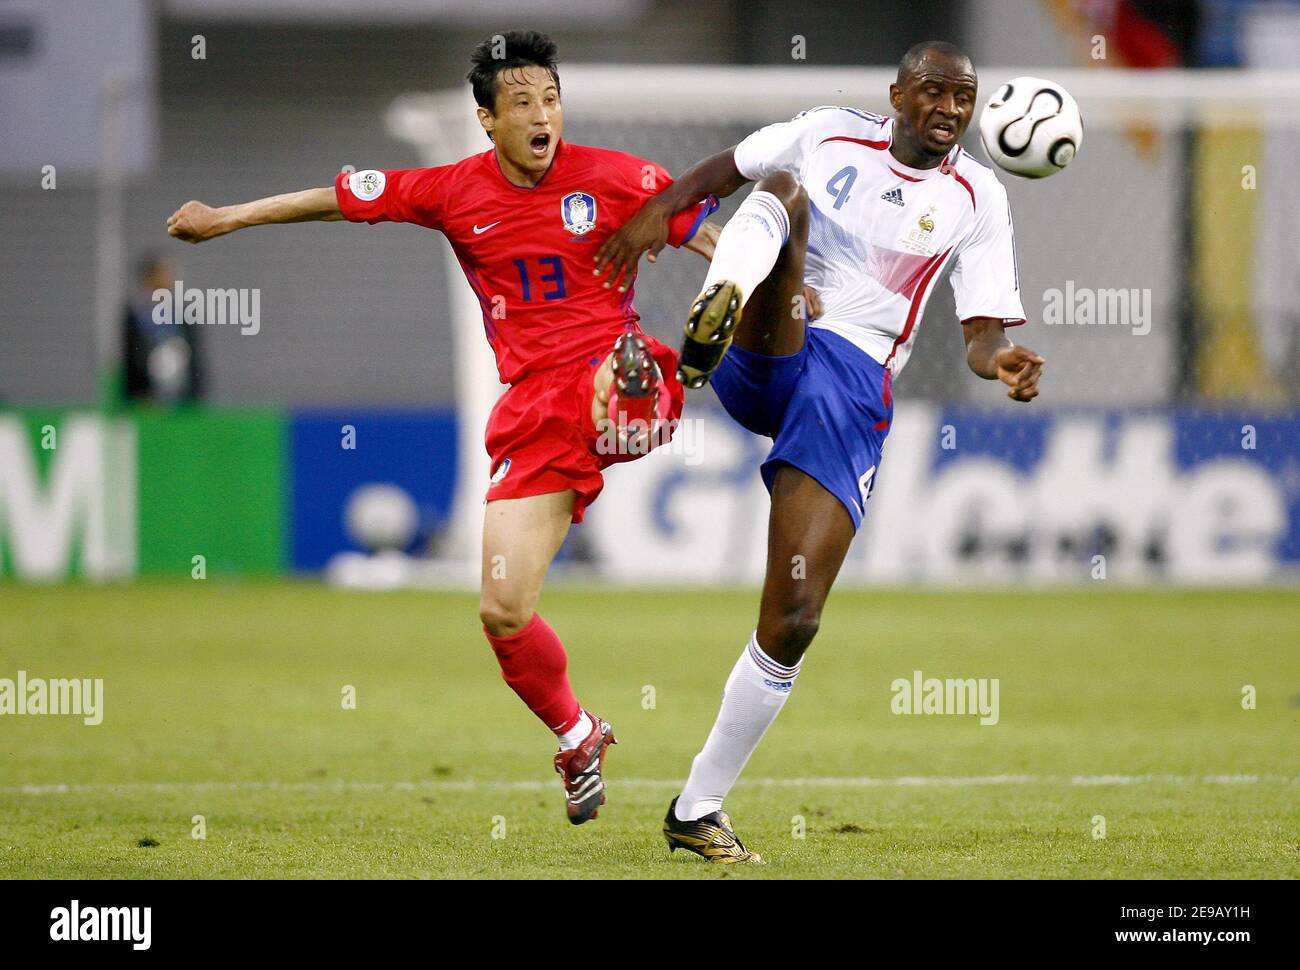 France's Patrick Vieira and South Korea's Eul-yong Lee battle for the ball during the World Cup 2006, Group G France vs South Korea, in Leipzig, Germany, on June 18, 2006. The game ended in draw 1-1. Photo by Christian Liewig/ABACAPRESS.COM Stock Photo